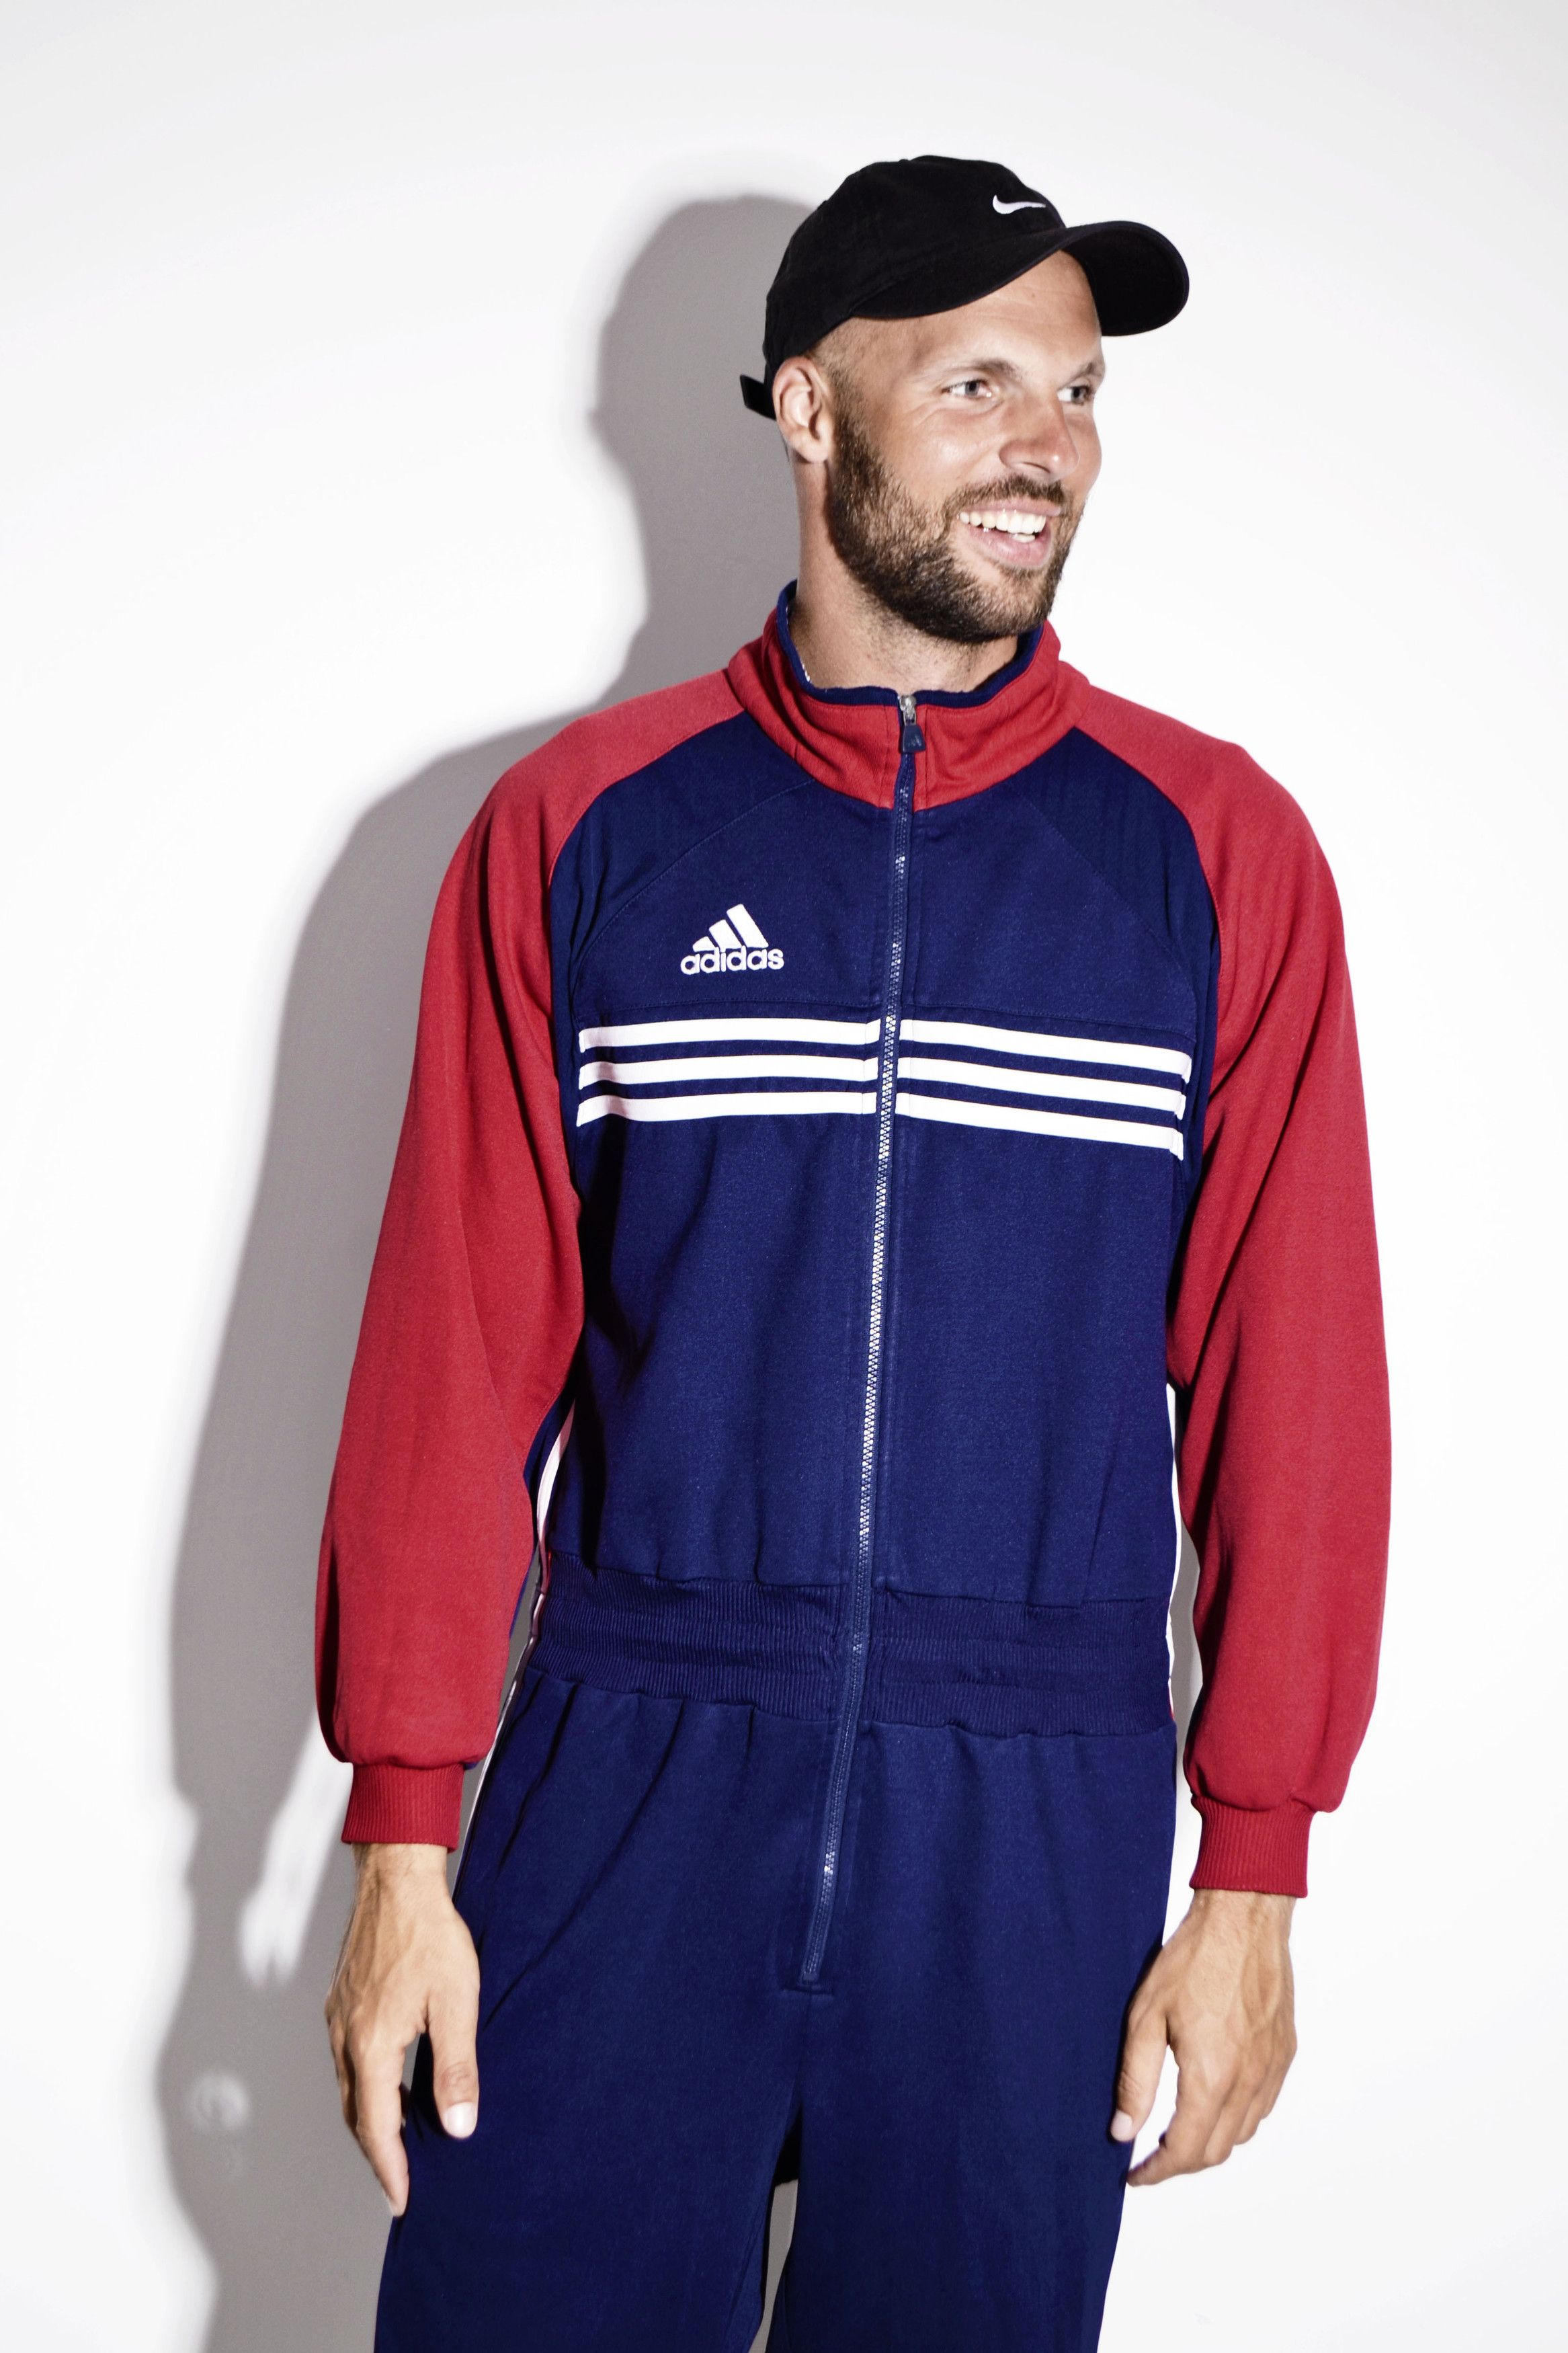 Adidas Vintage men sport onesie ADIDAS | 80s retro Old School overall full coverall jumpsuit sweatsuit one part piece tracksuit blue red | Large Size US 34 / EU 50 - 4 Thumbnail